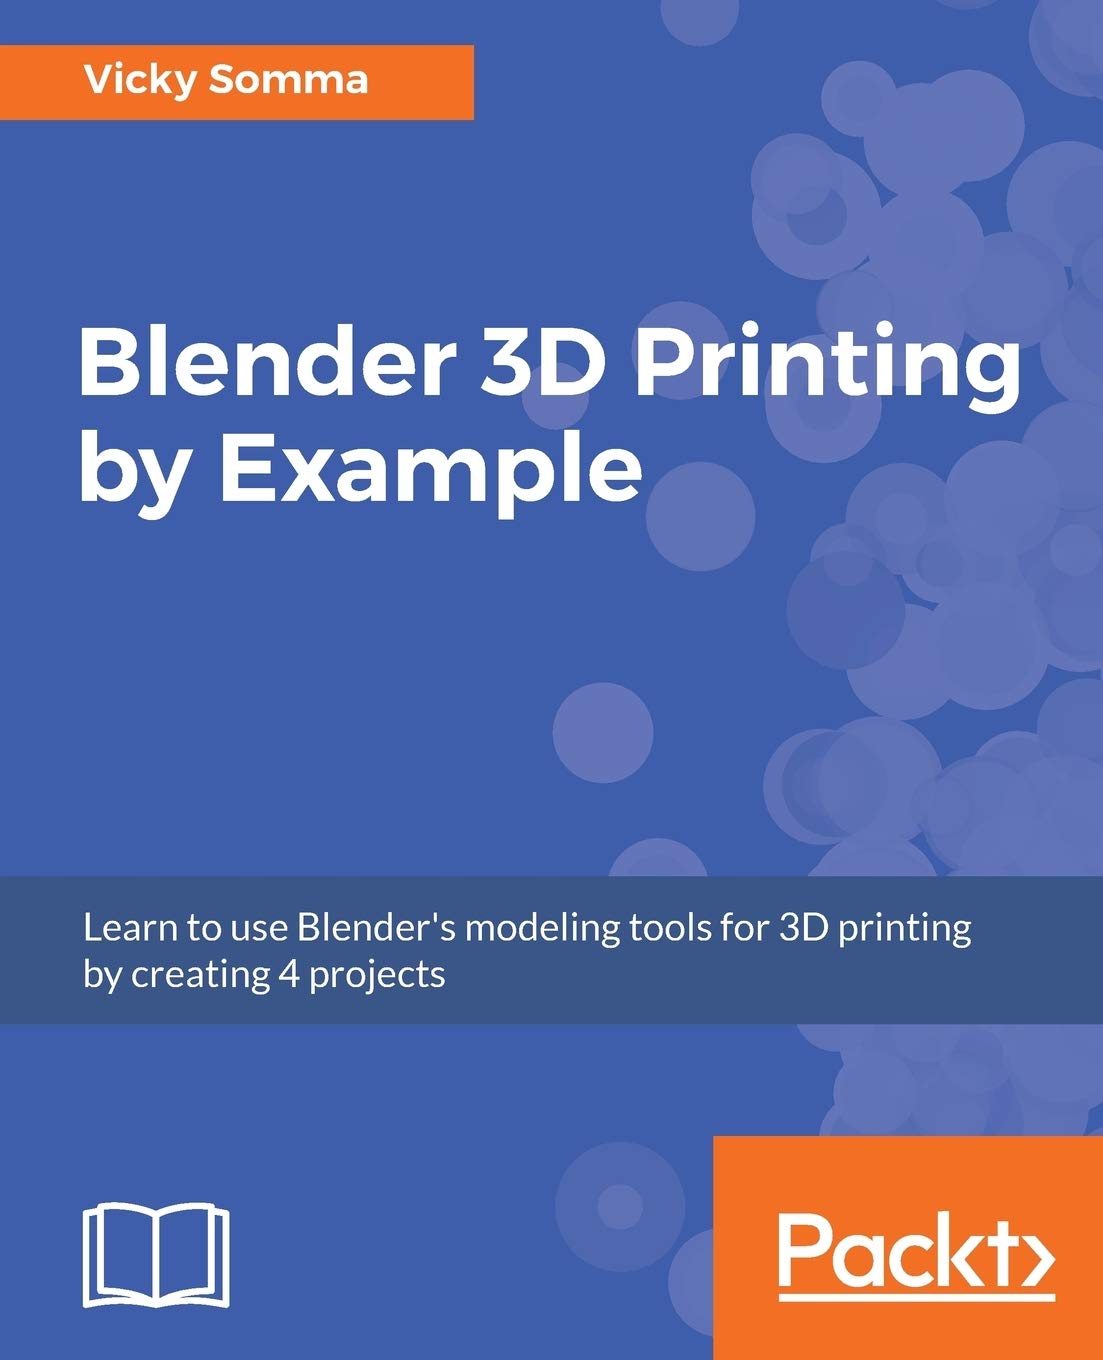 Blender 3D Printing by Example.: Learn to use Blender’s modeling tools for 3D printing by creating 4 projects